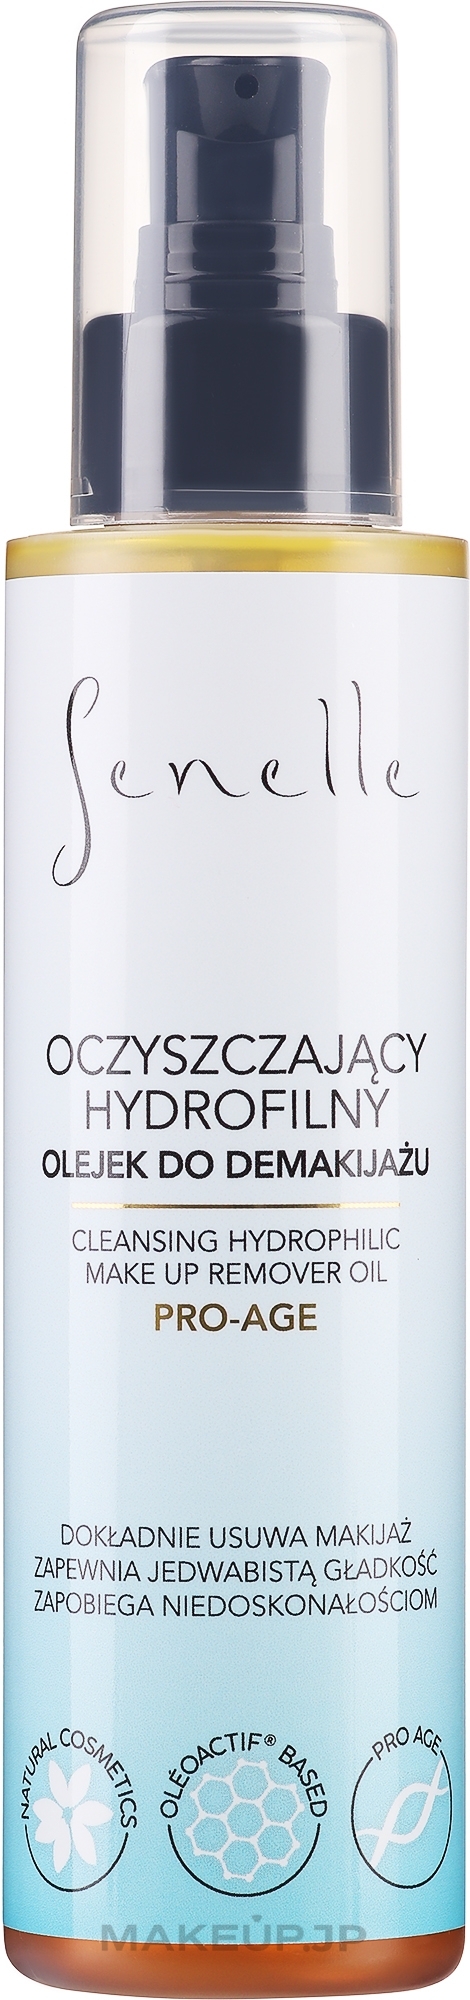 Cleansing Makeup Remover Oil - Senelle — photo 150 ml